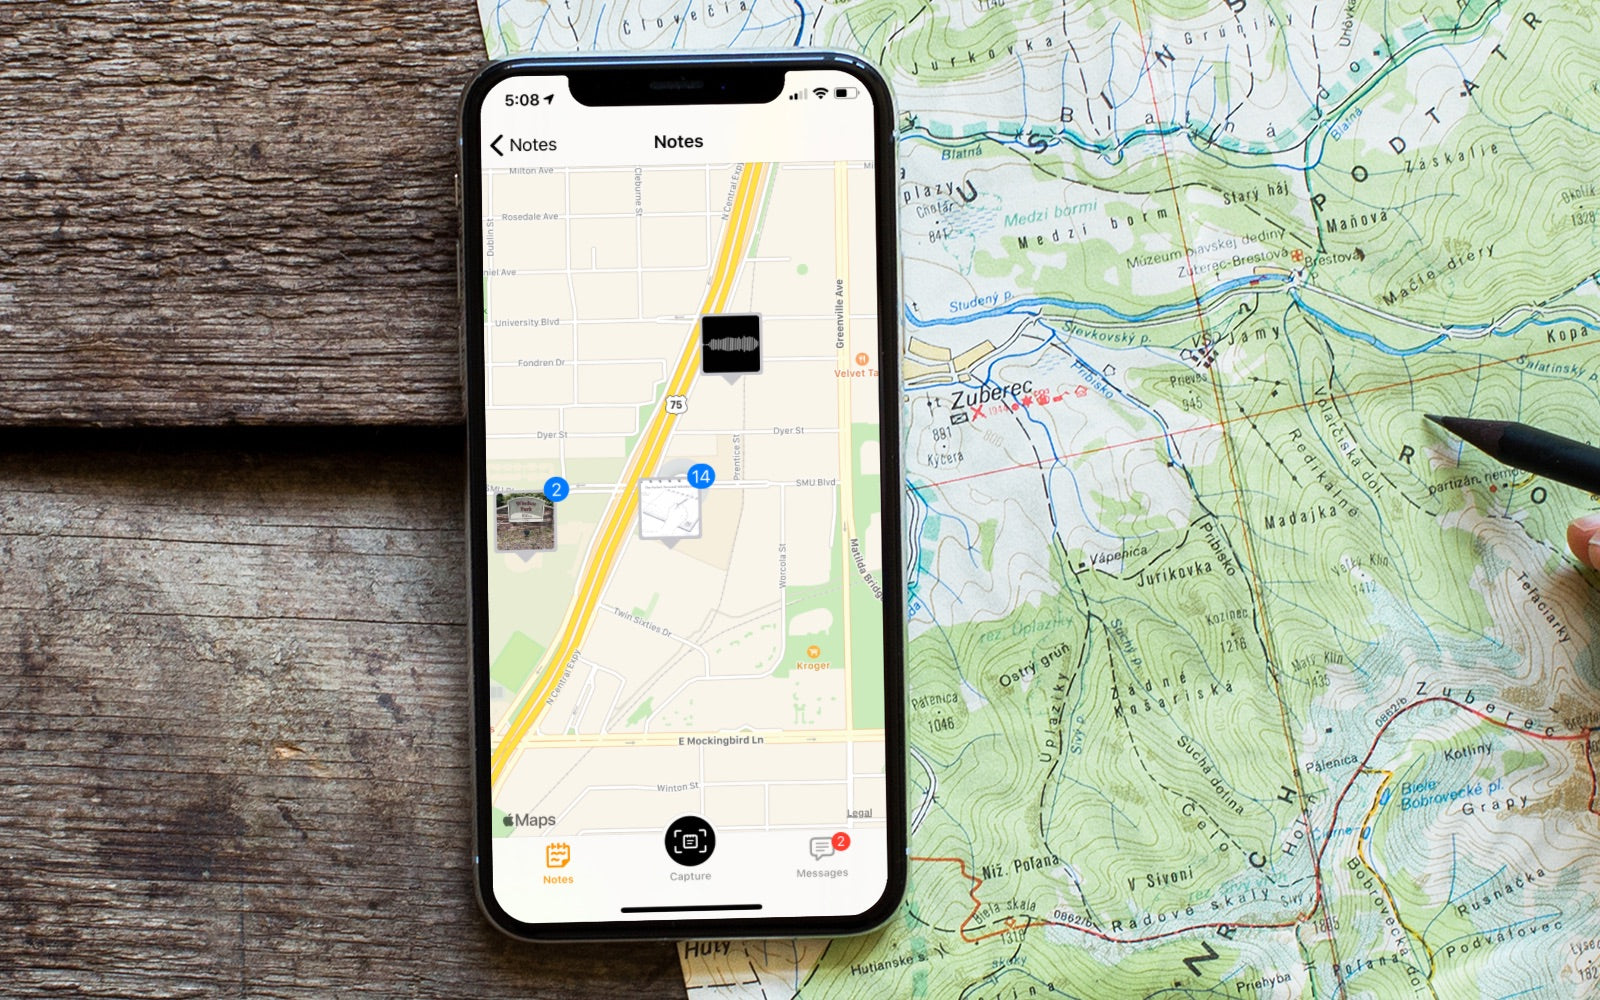 Do you travel? The THINKERS App makes it easy to find your notes with our built-in mapping feature. The perfect solution for consultants, bloggers, and travelers that want a quick way to find their handwritten notes based on their location.